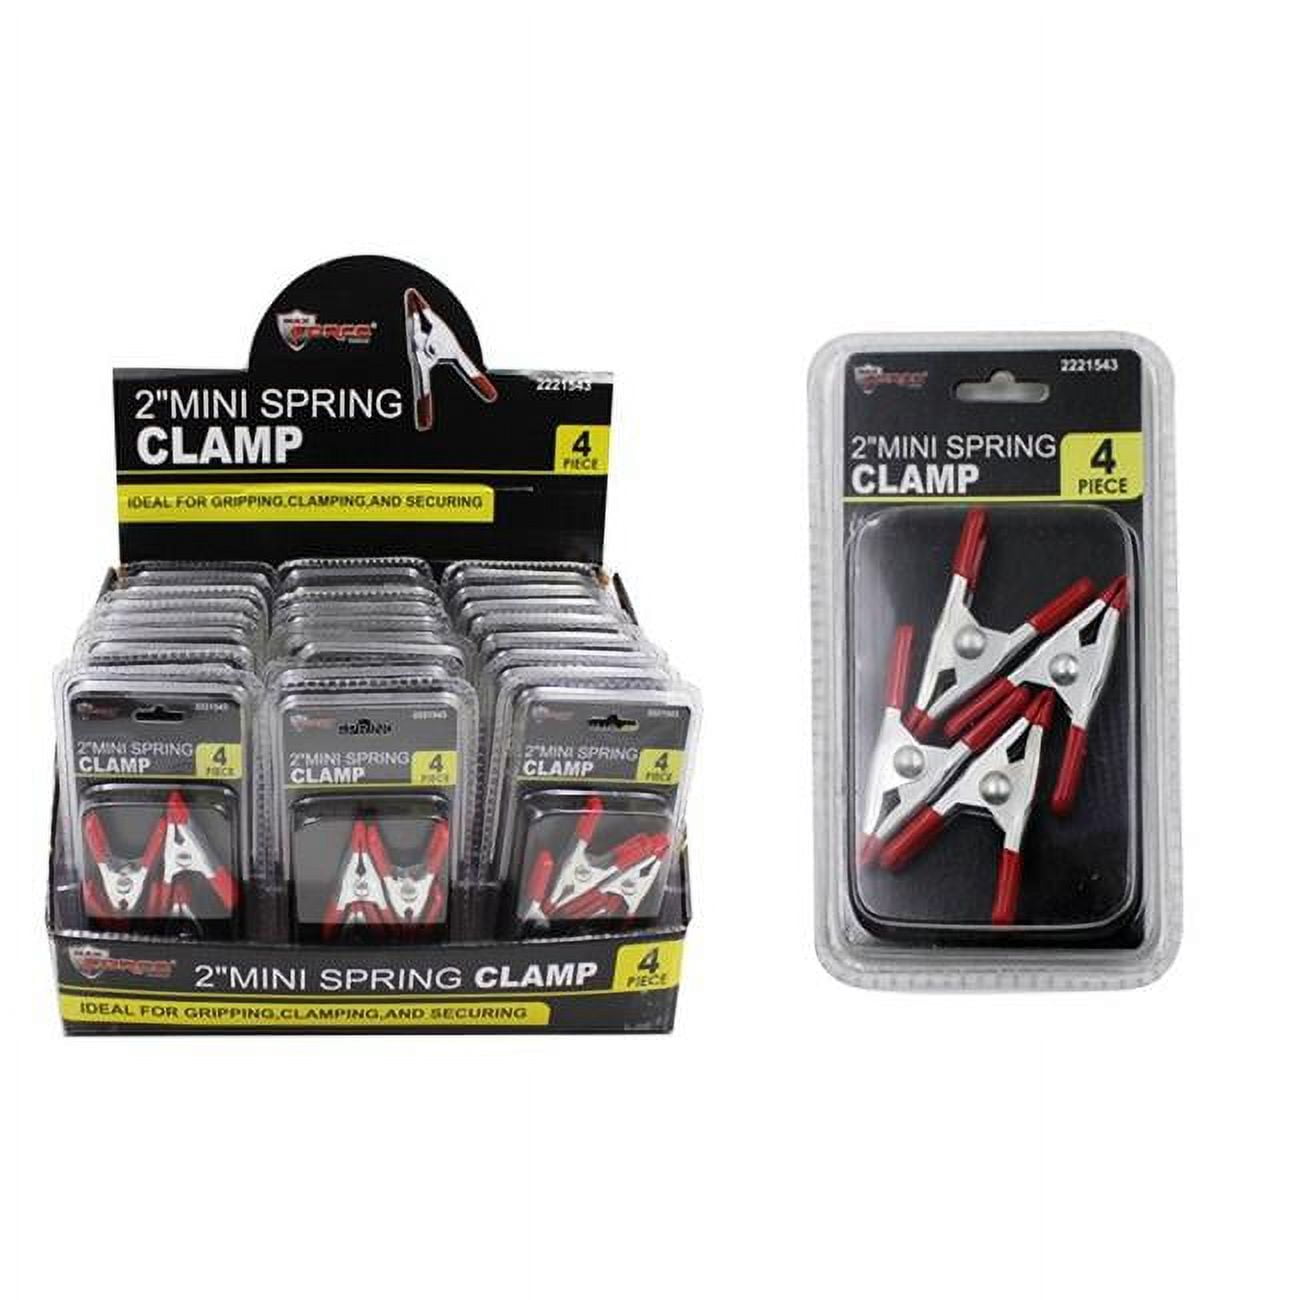 2291847 2 Ft. 4 Piece Metal Spring Clamps - Case Of 24